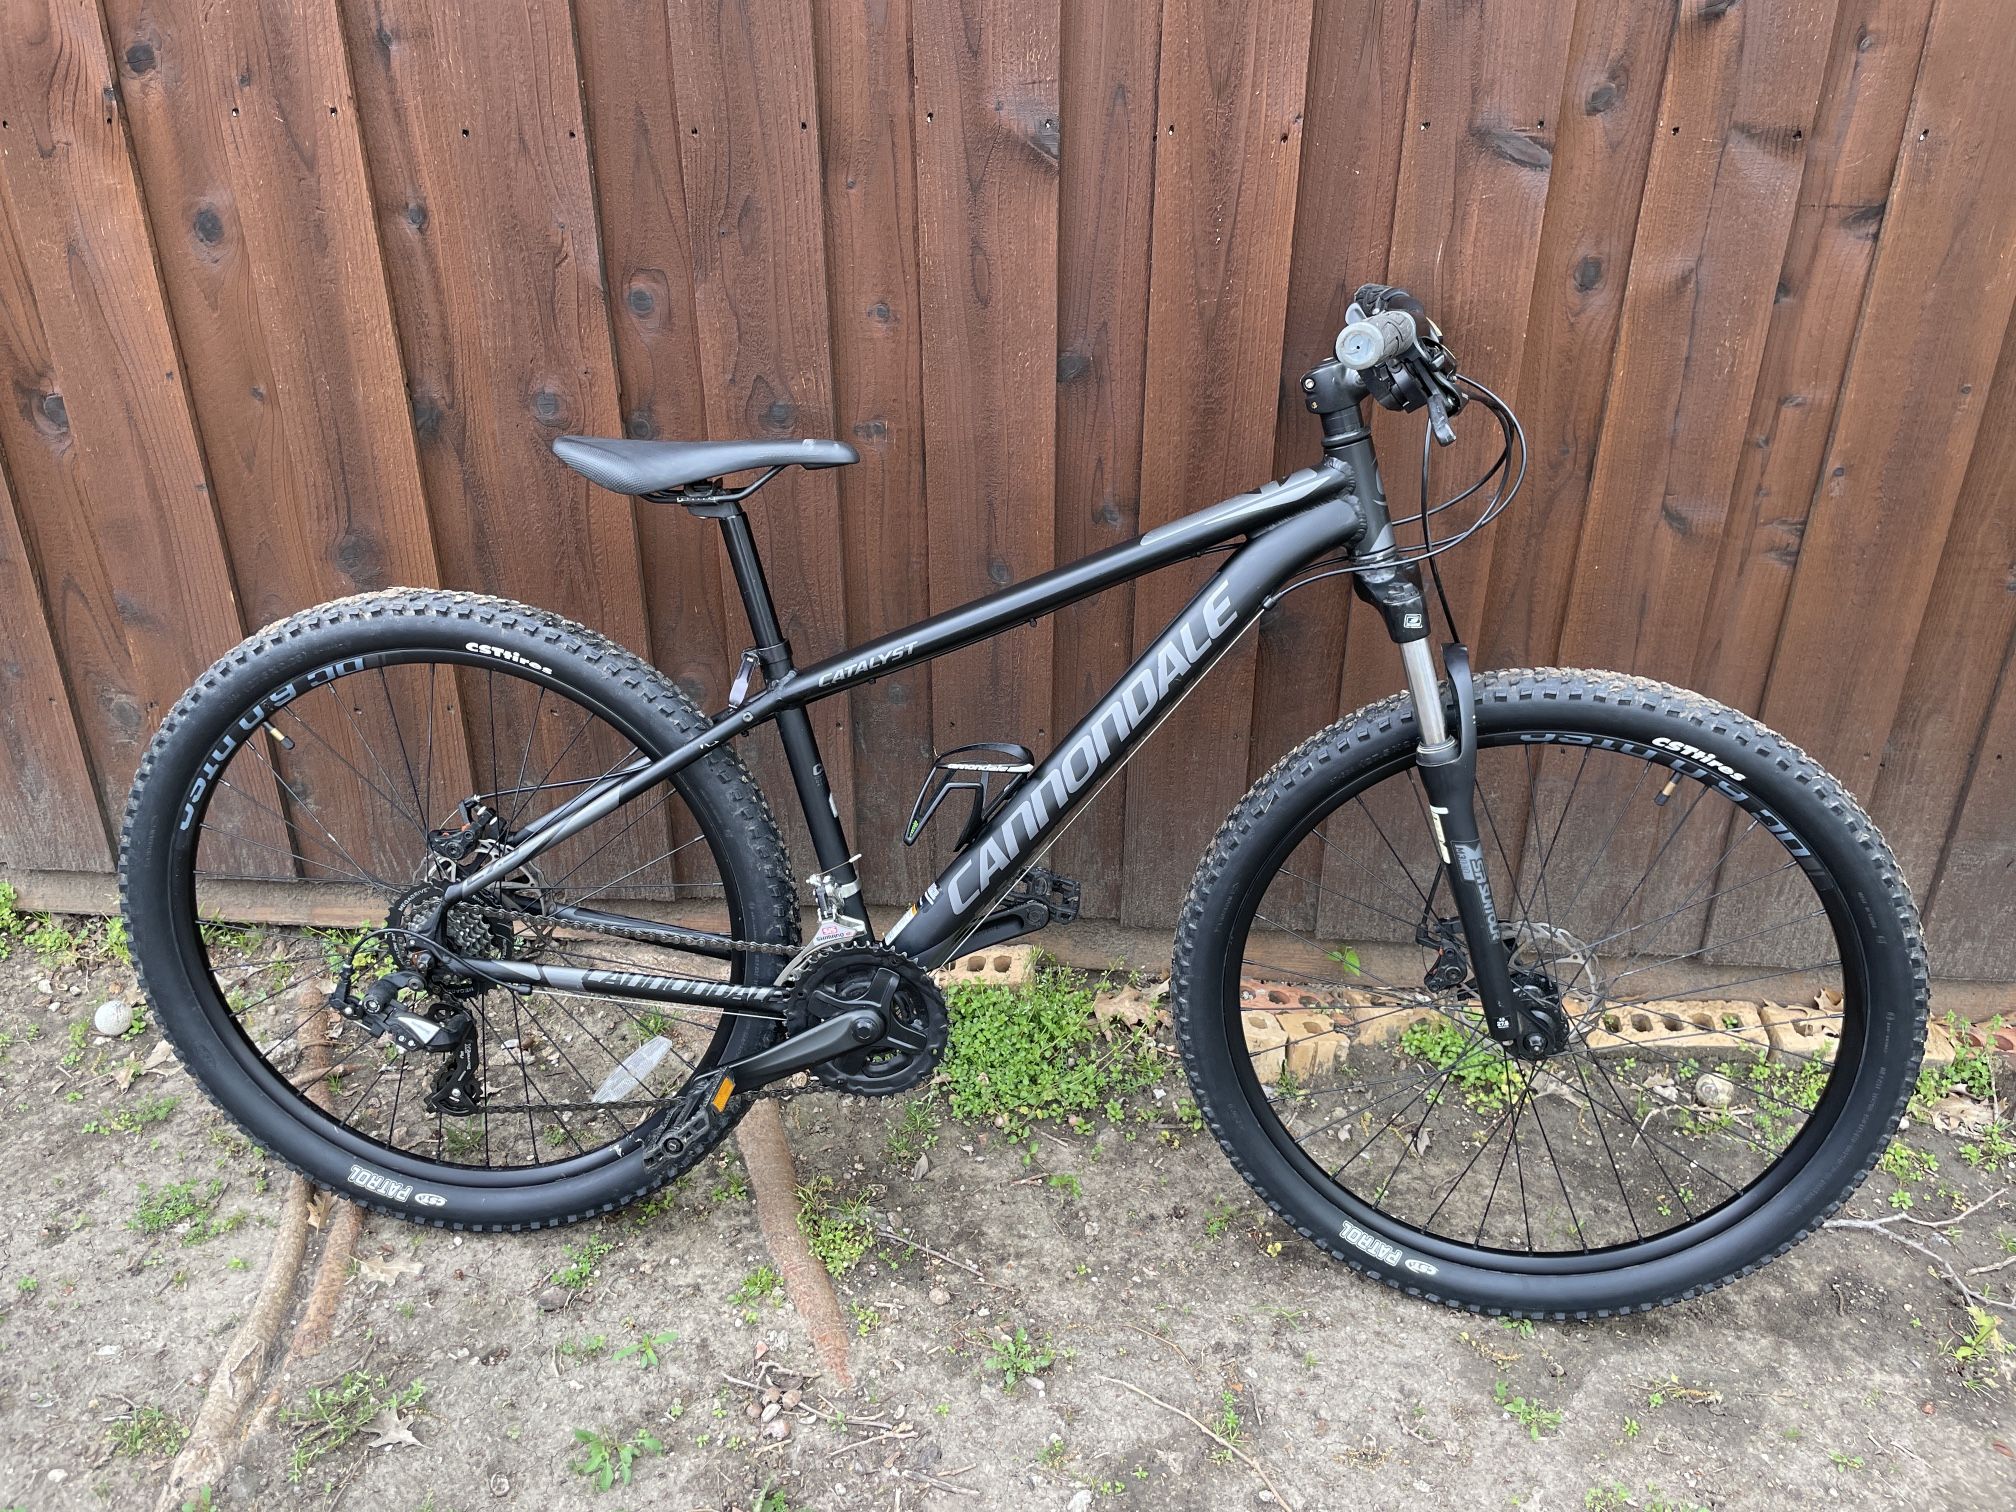 Black Cannondale Catalyst 27.5 Mountain Bike frame size small. like new barely used it just sits in the garage everything works perfectly . Located in